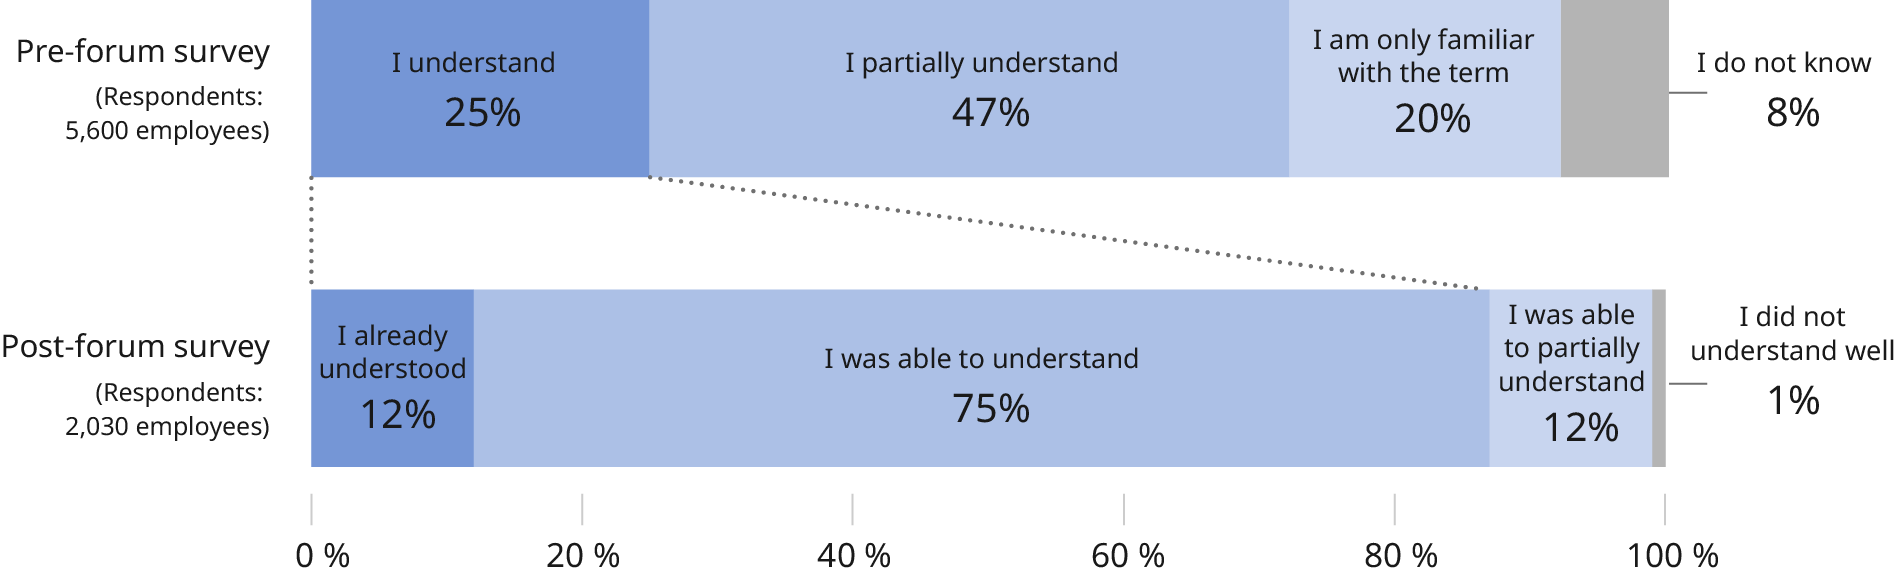 Figure: Results of the pre- and post-forum surveys to the question, "Do you understand DEI?" There were 5,600 respondents to the pre-forum survey. 25% answered that they understand DEI, 47% that they partially understand it, 20% that they are only familiar with the term, and 8% that they do not know about it. The number of respondents to the post-forum survey was 2,030. 12% answered that already understood DEI, 75% that they were able to understand it, 12% that they were able to partially understand it, and 1% that they did not understand it well.